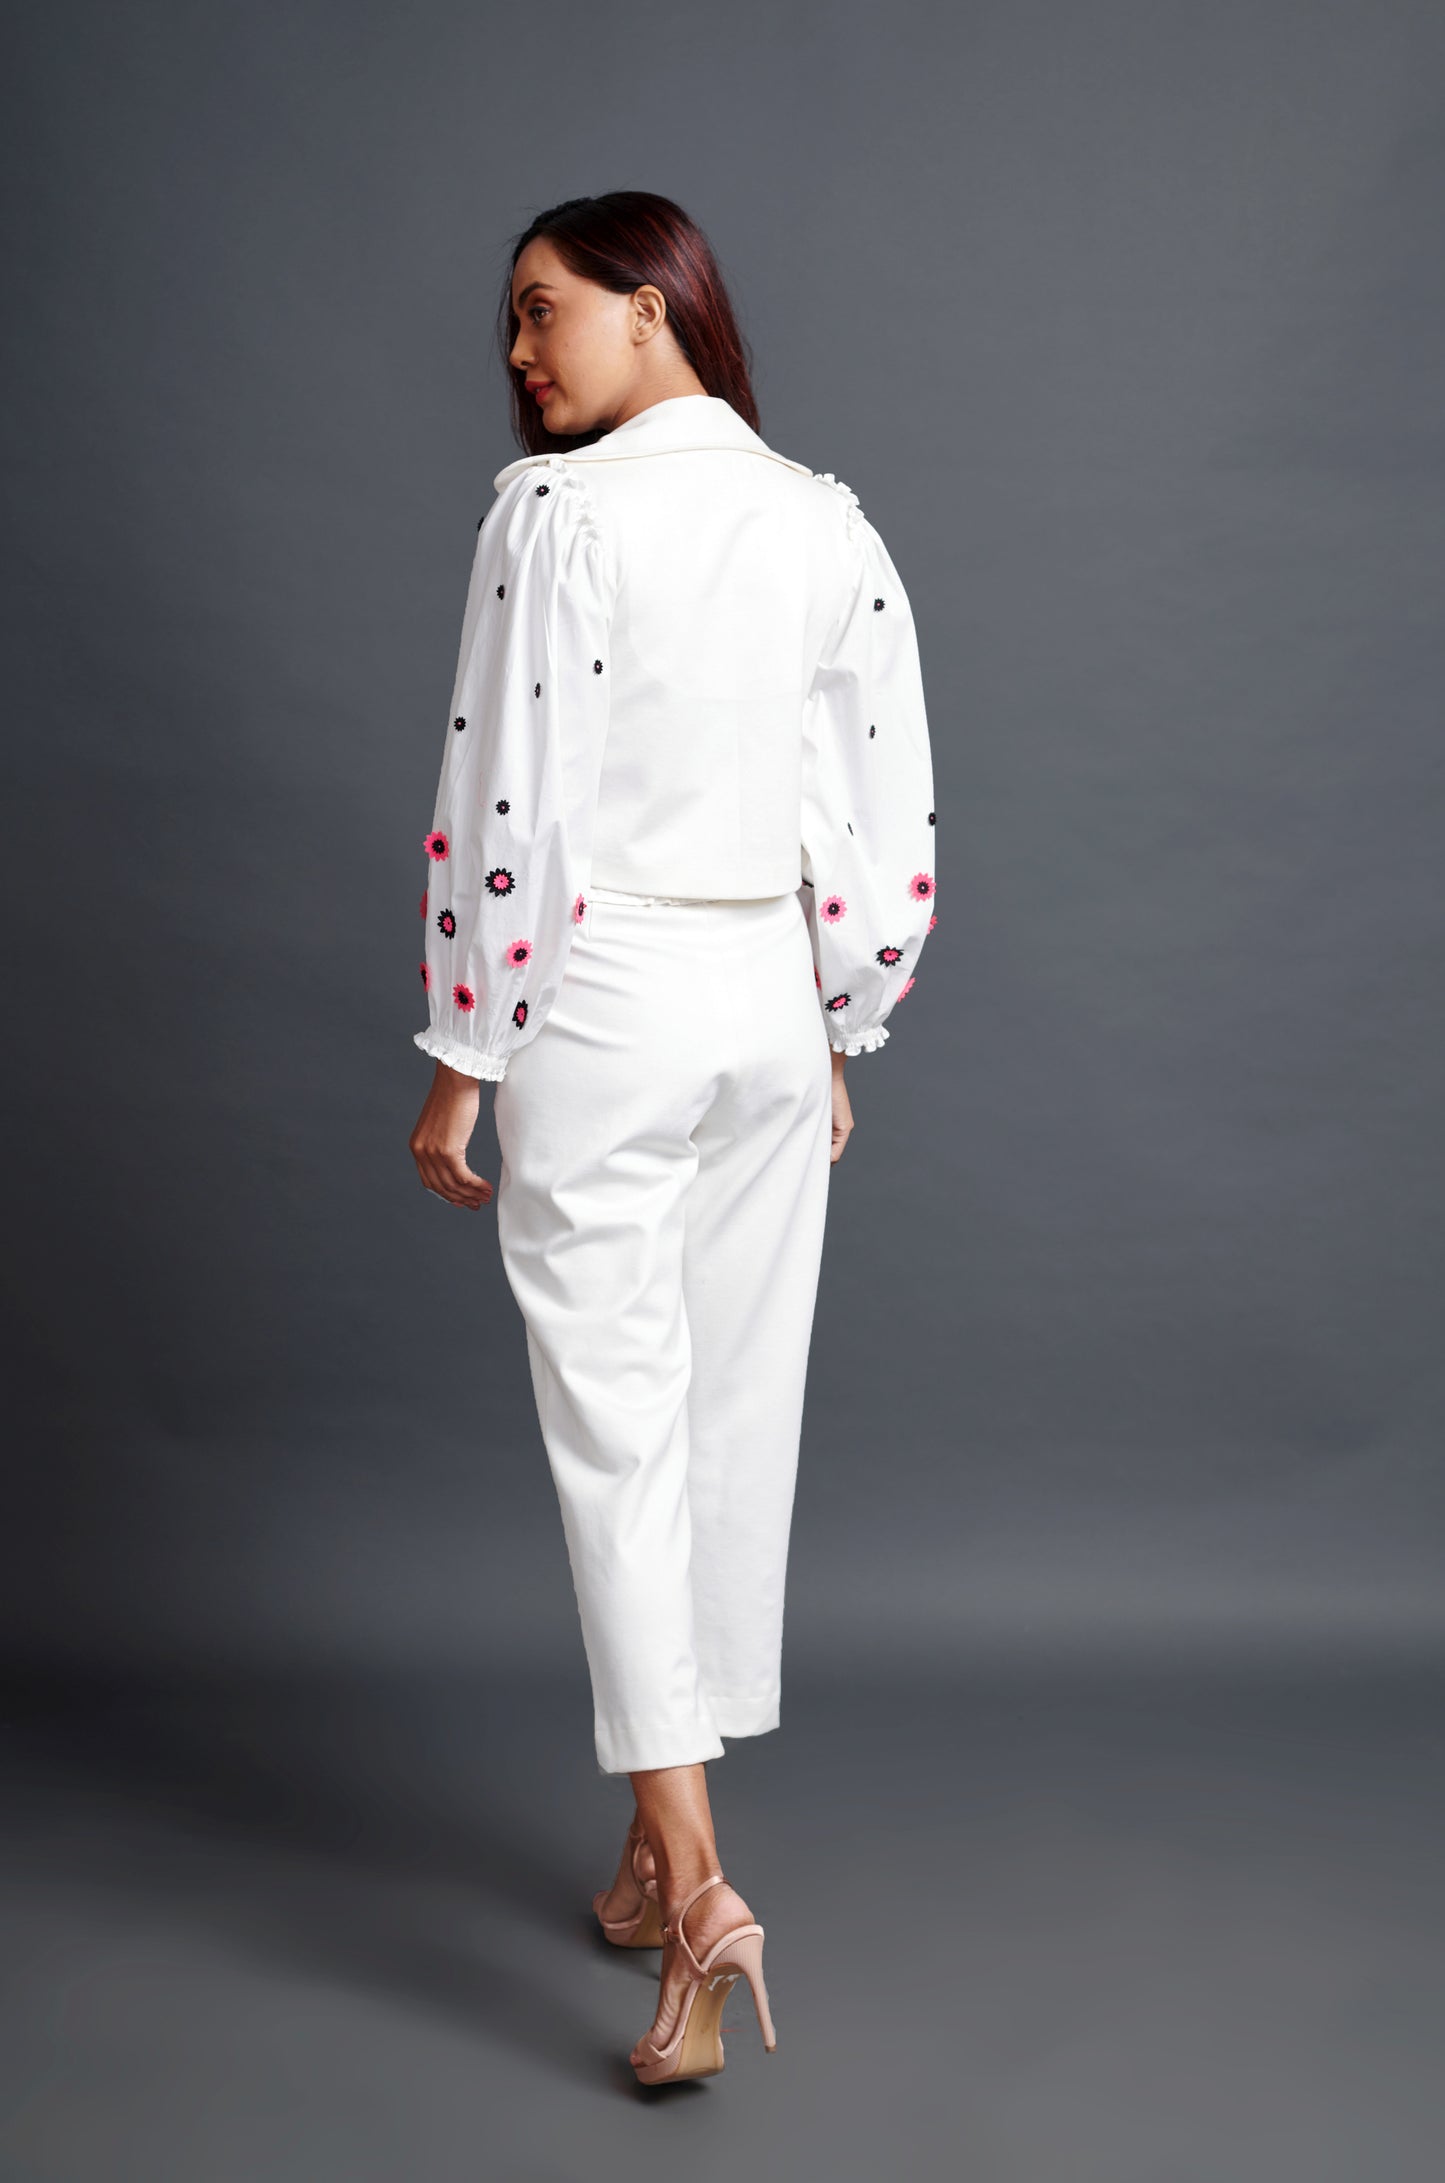 mage of WHITE CUT WORK DETAILED SLEEVED OVERLAP CROP JACKET AND PANTS. From savoirfashions.com